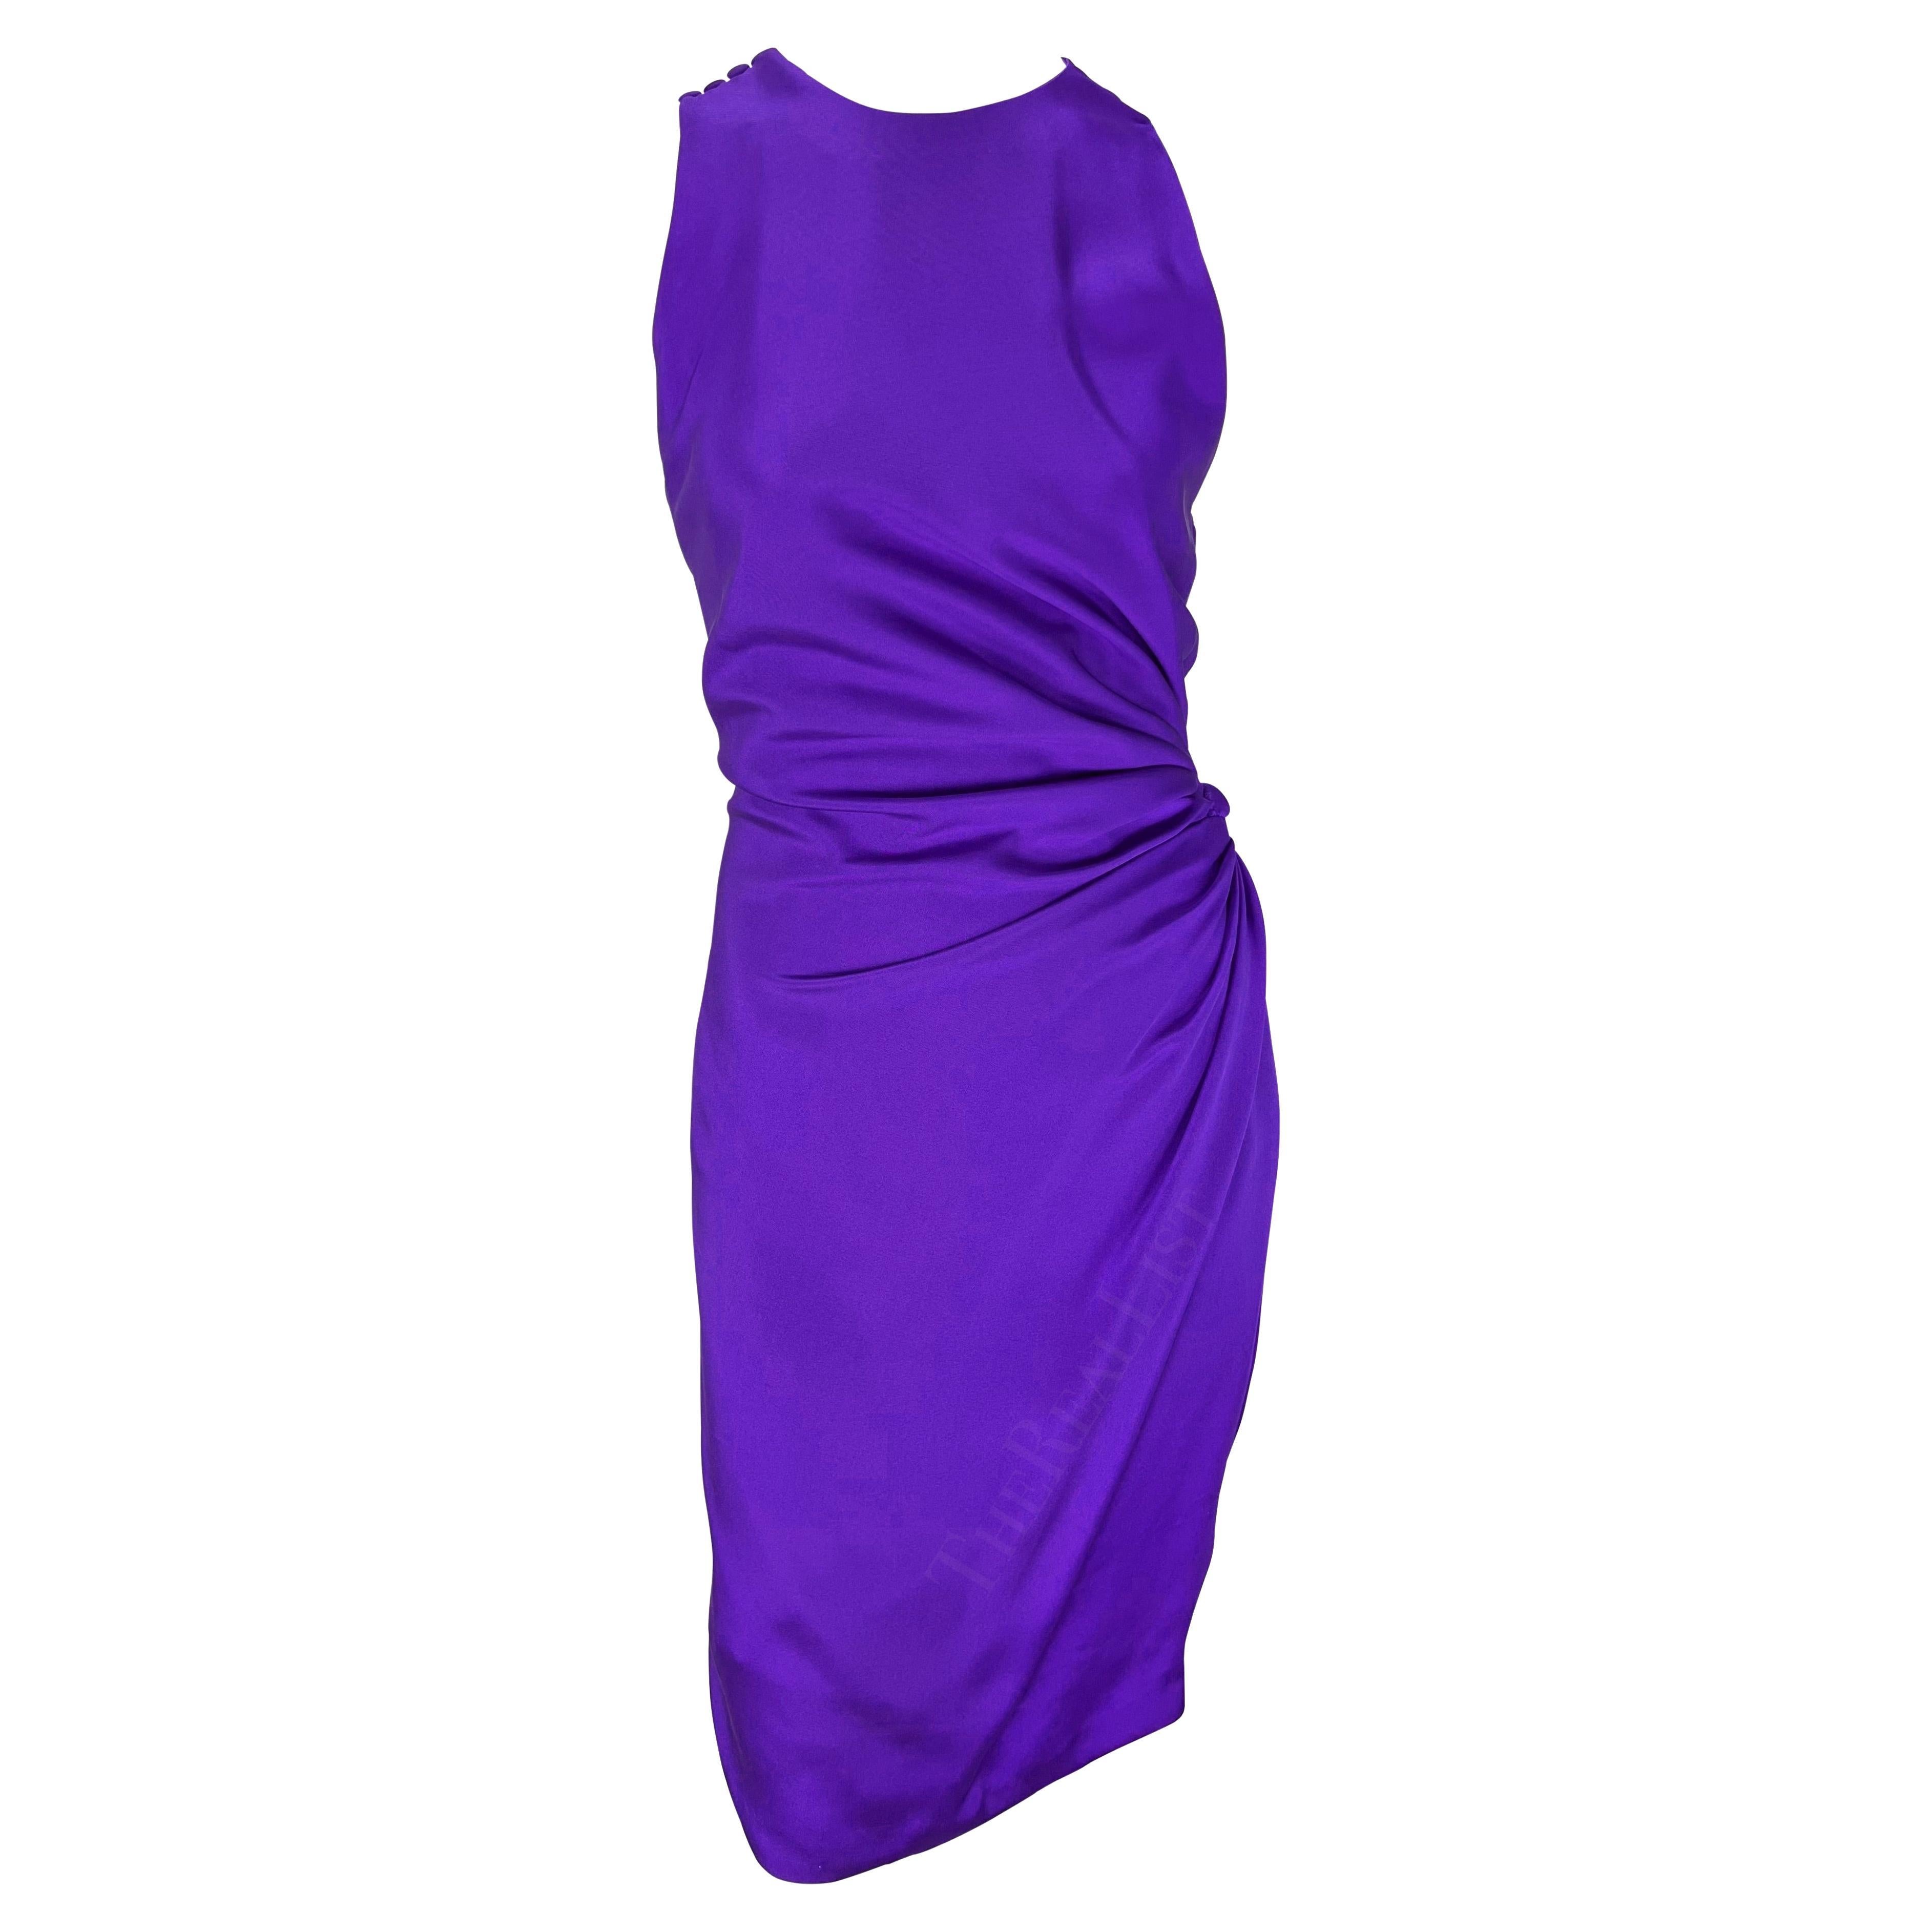 S/S 1991 Gianni Versace Purple Gathered Ruched Sleeveless Cocktail Dress For Sale